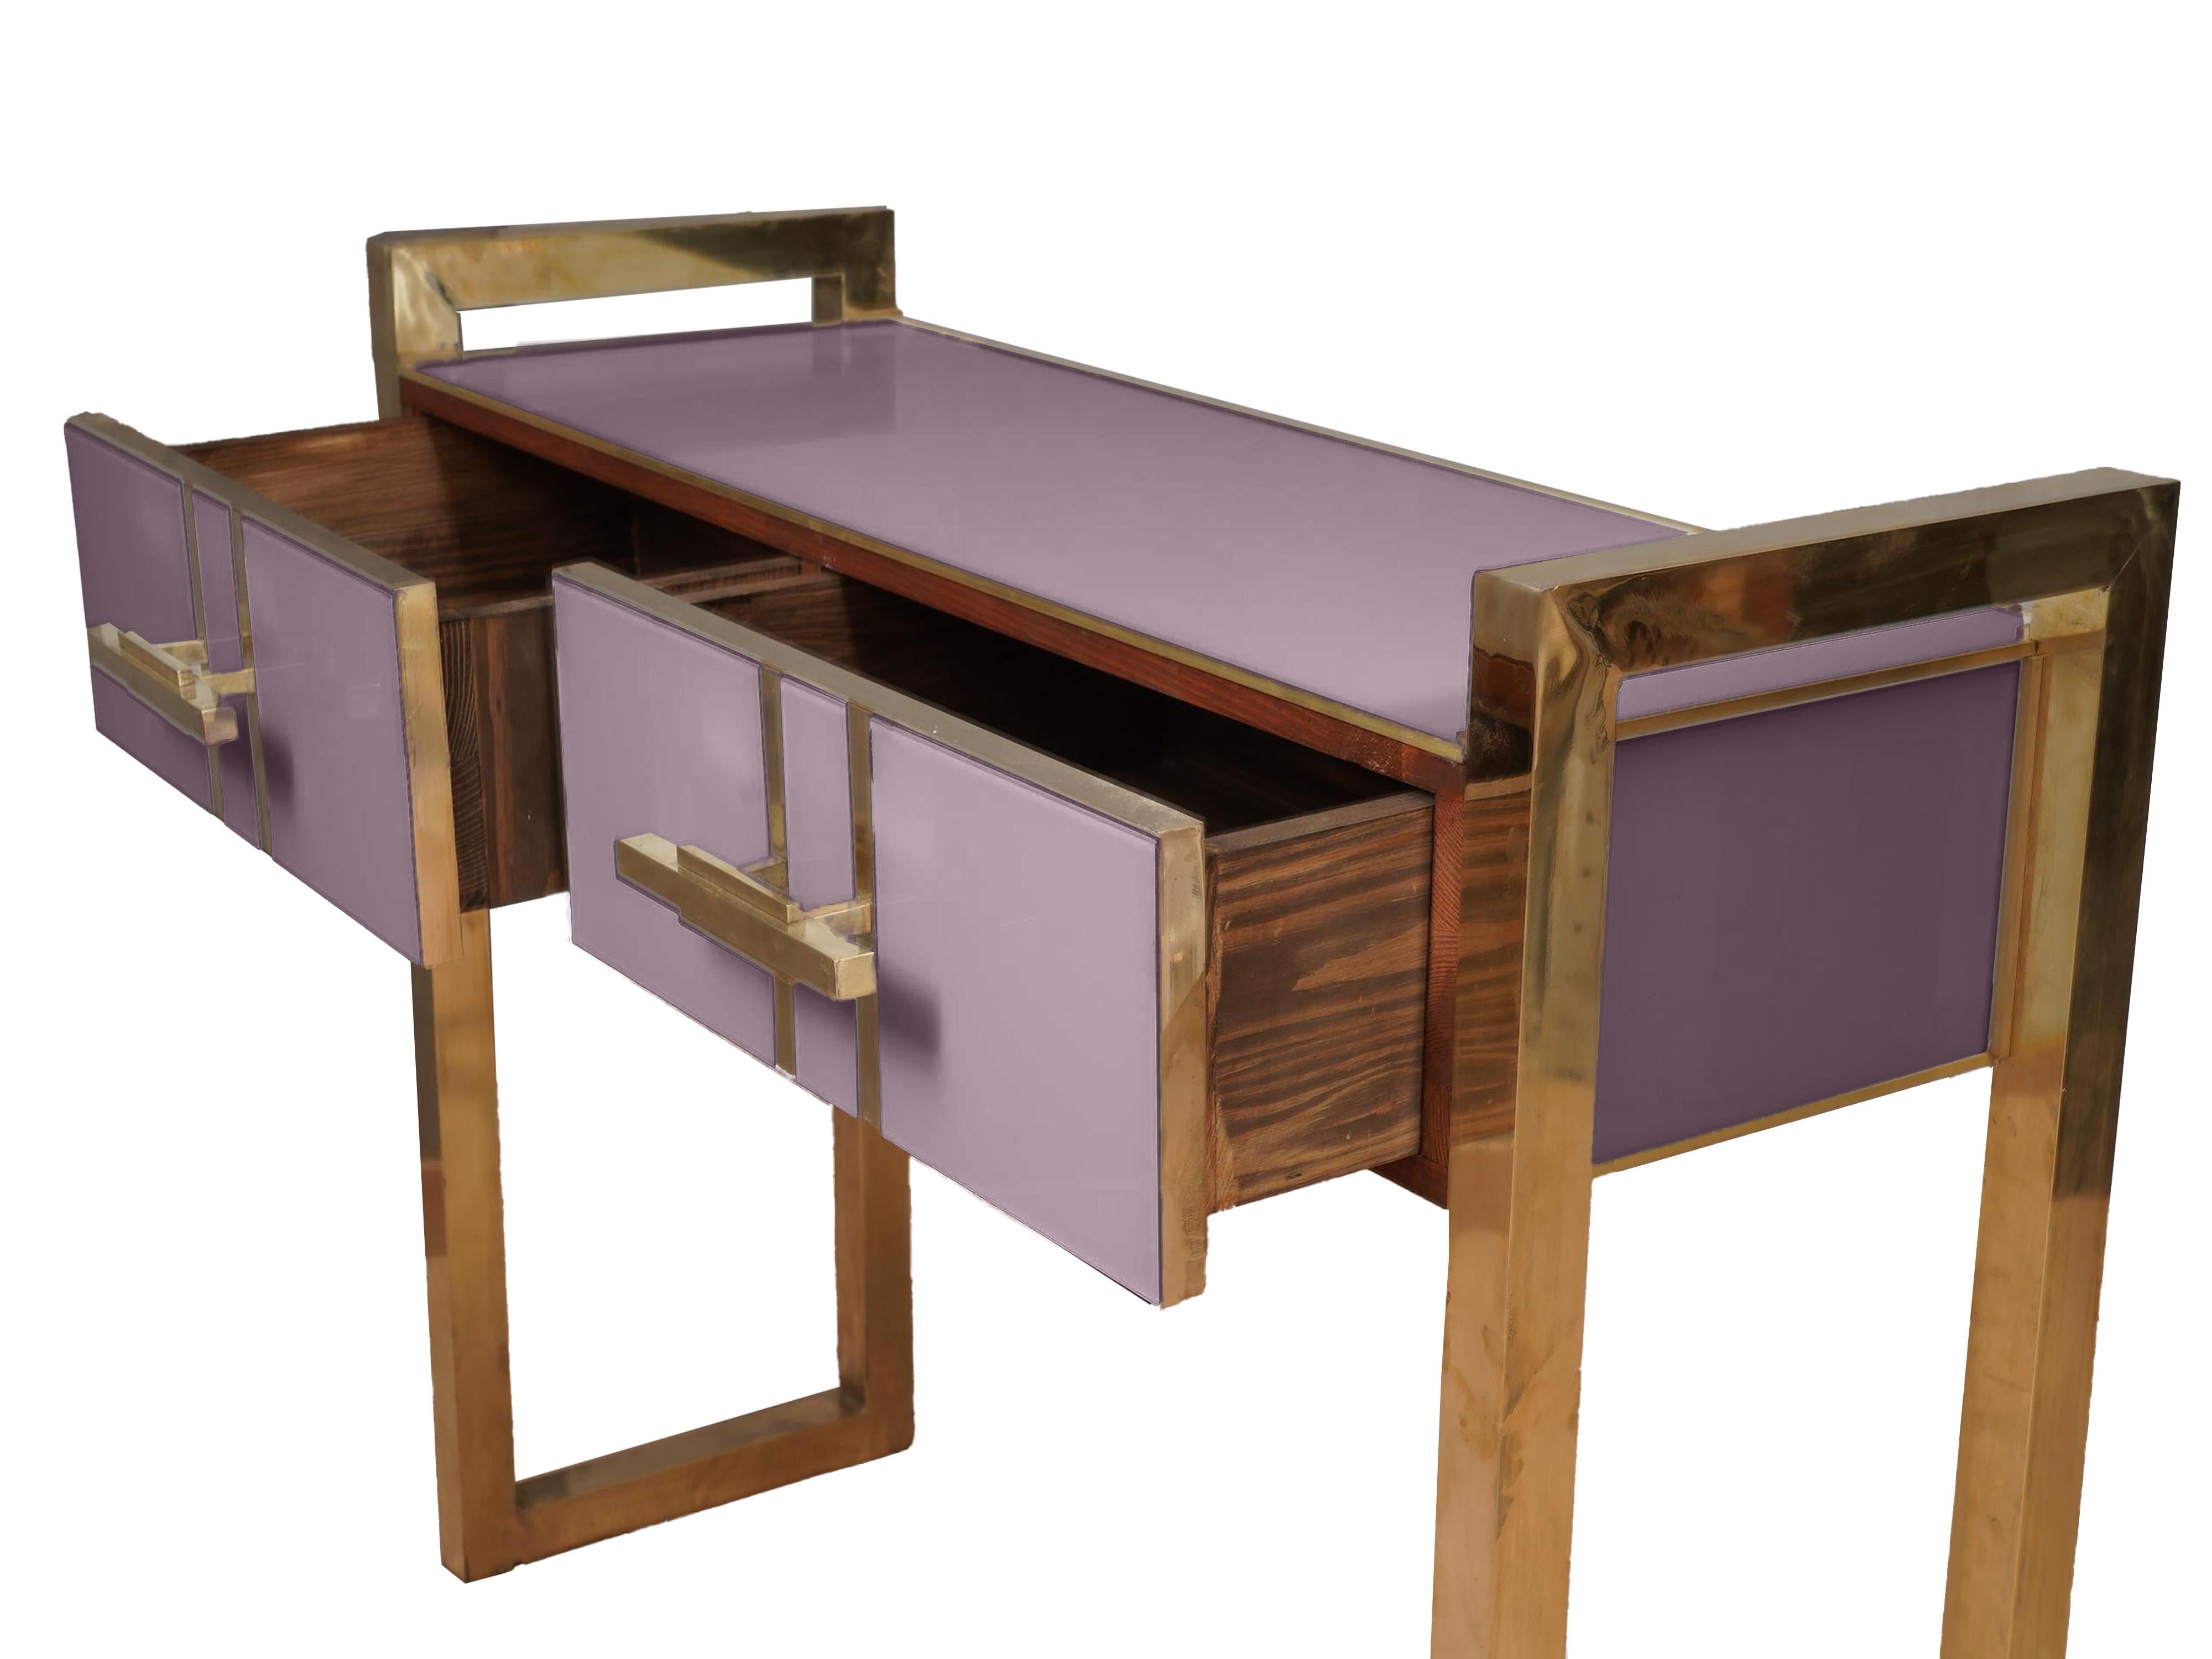 Italian Mid Century Modern Pastel Purple Desk Murano Glass Made in Italy Available For Sale